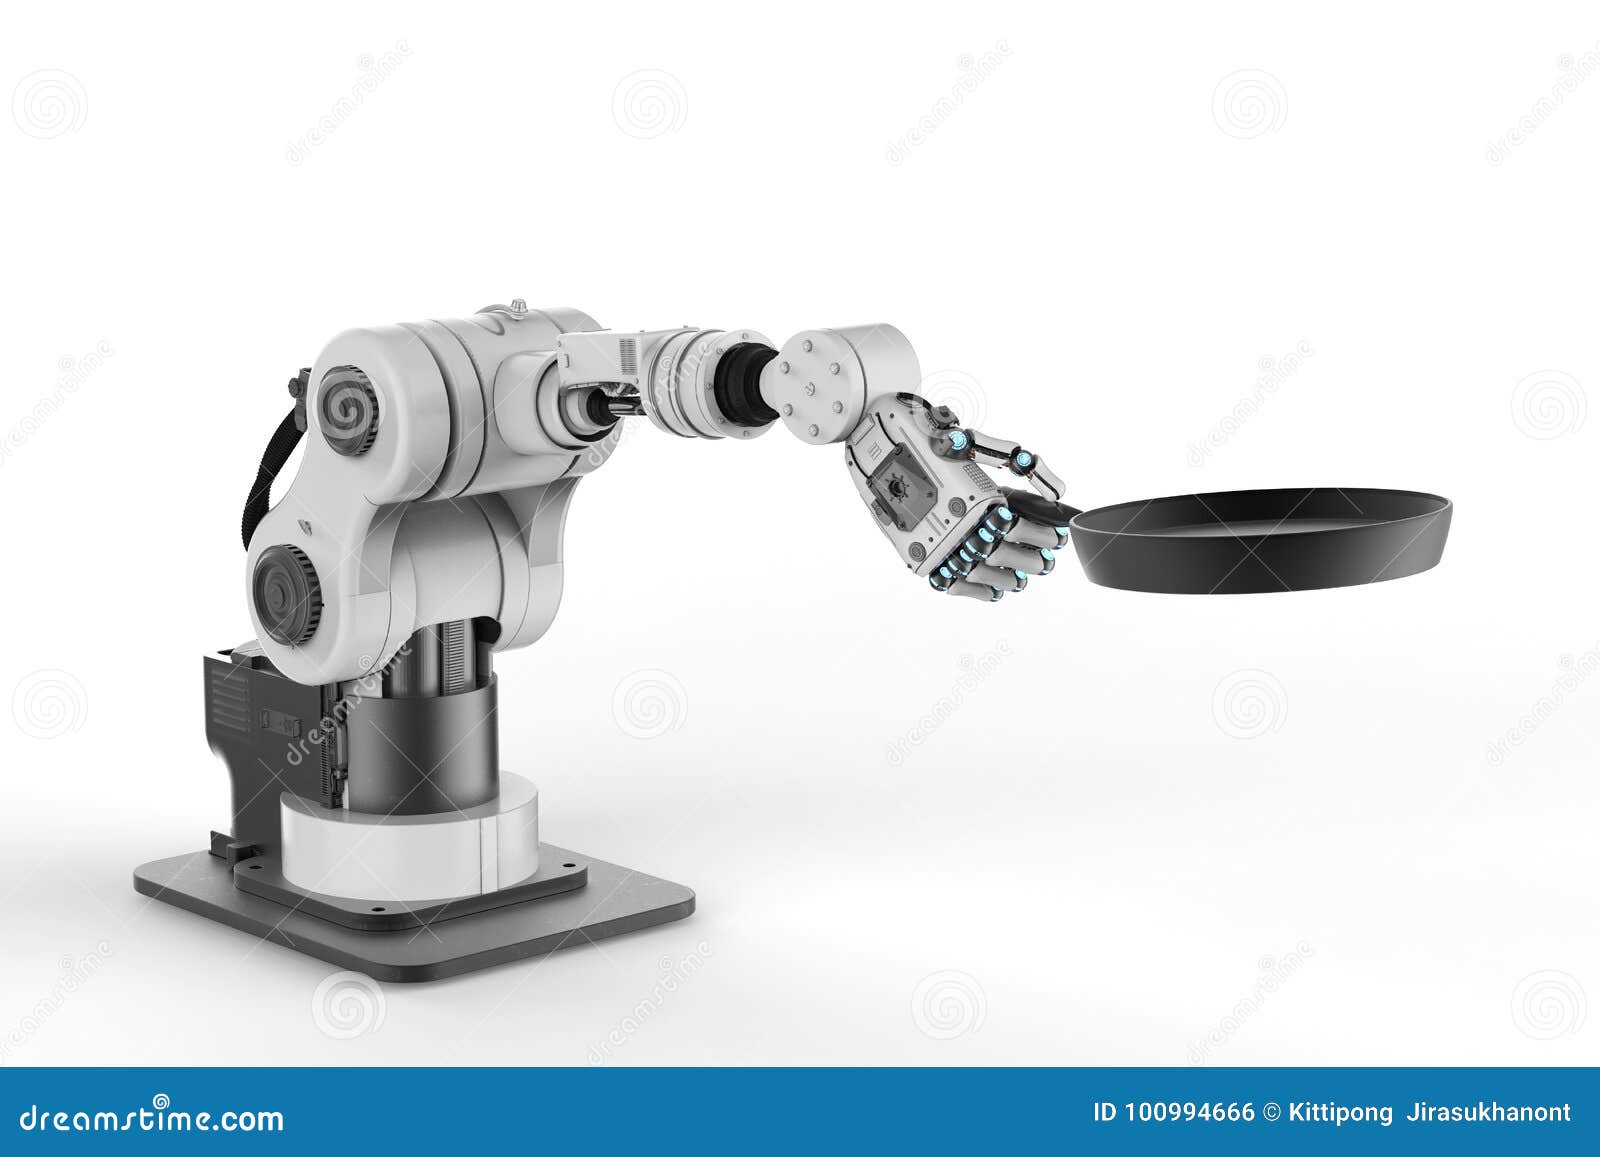 Robot Hand Holding Frying Pan Stock Photo Image of computer, 100994666